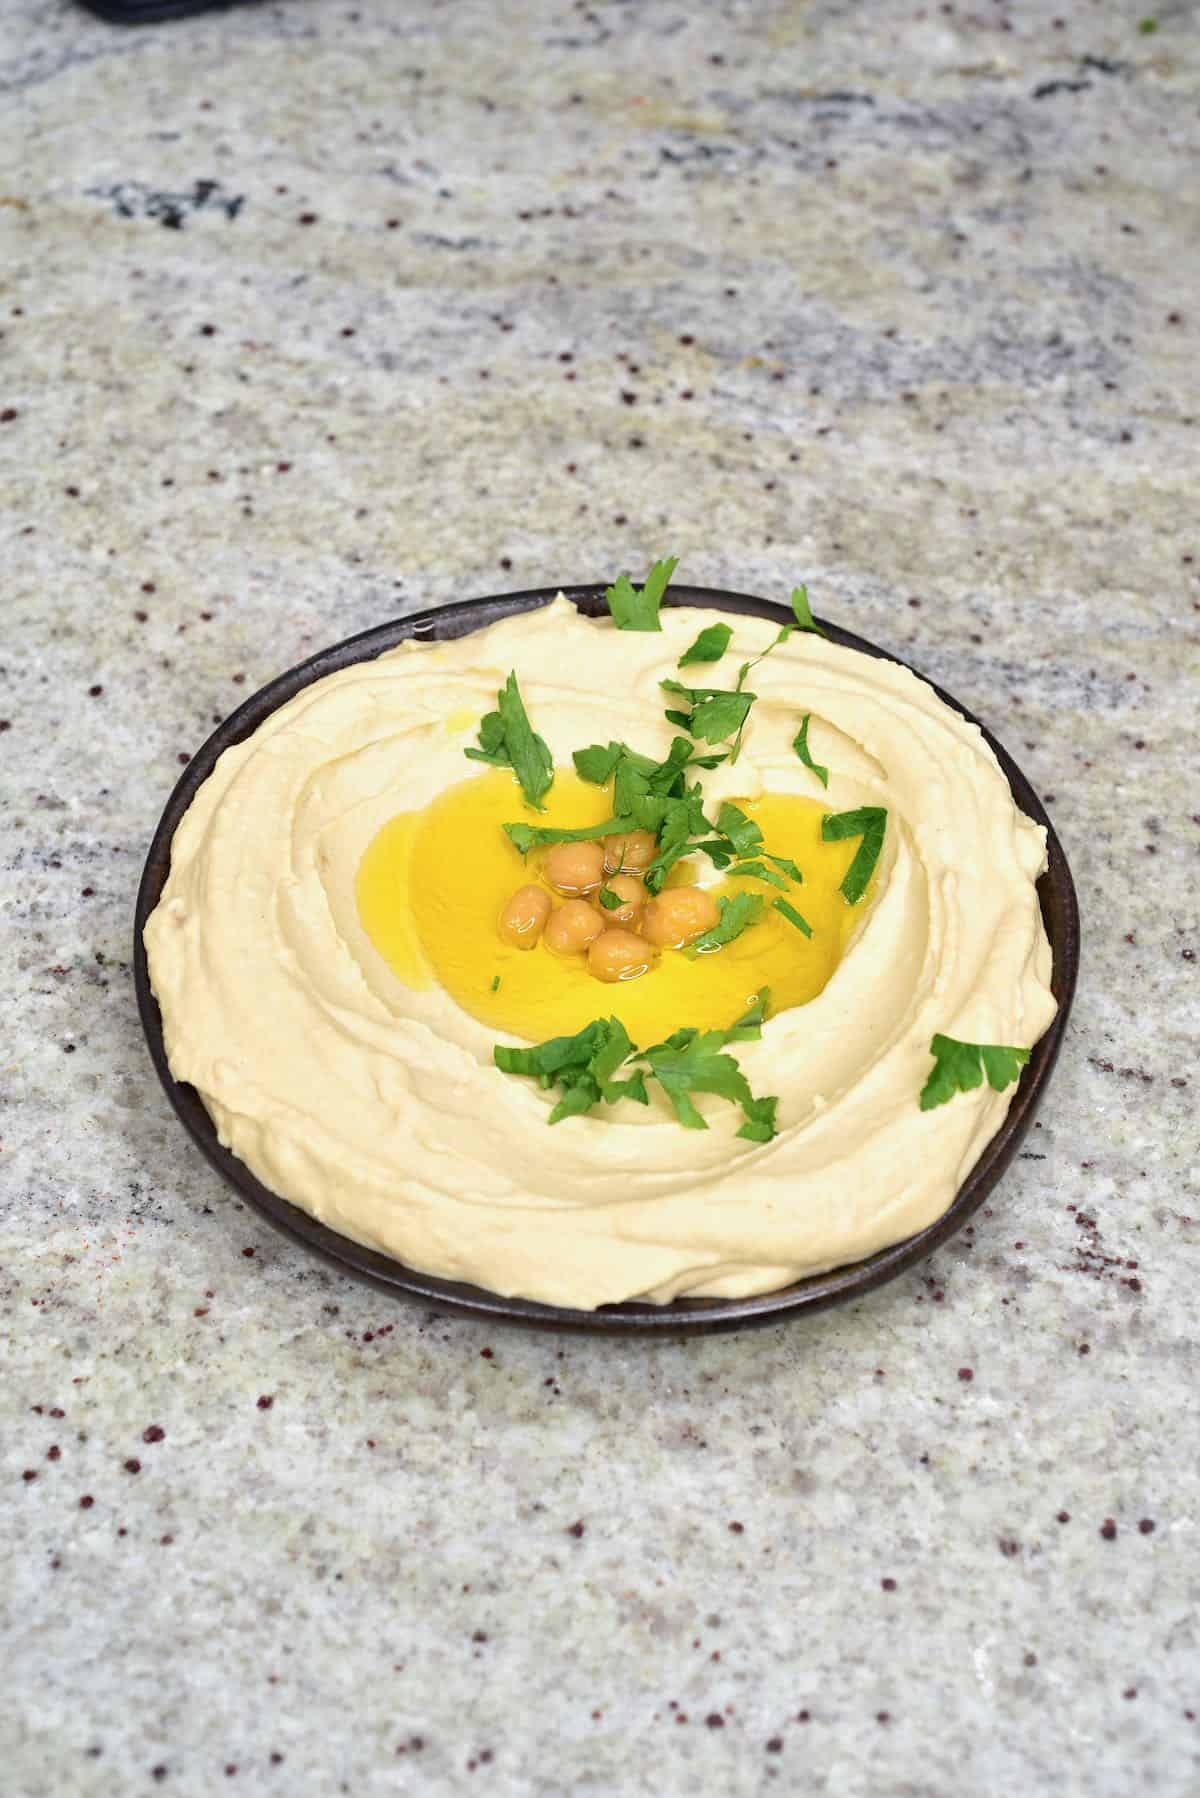 A bowl with hummus topped with some oil, chickpeas, and coriander